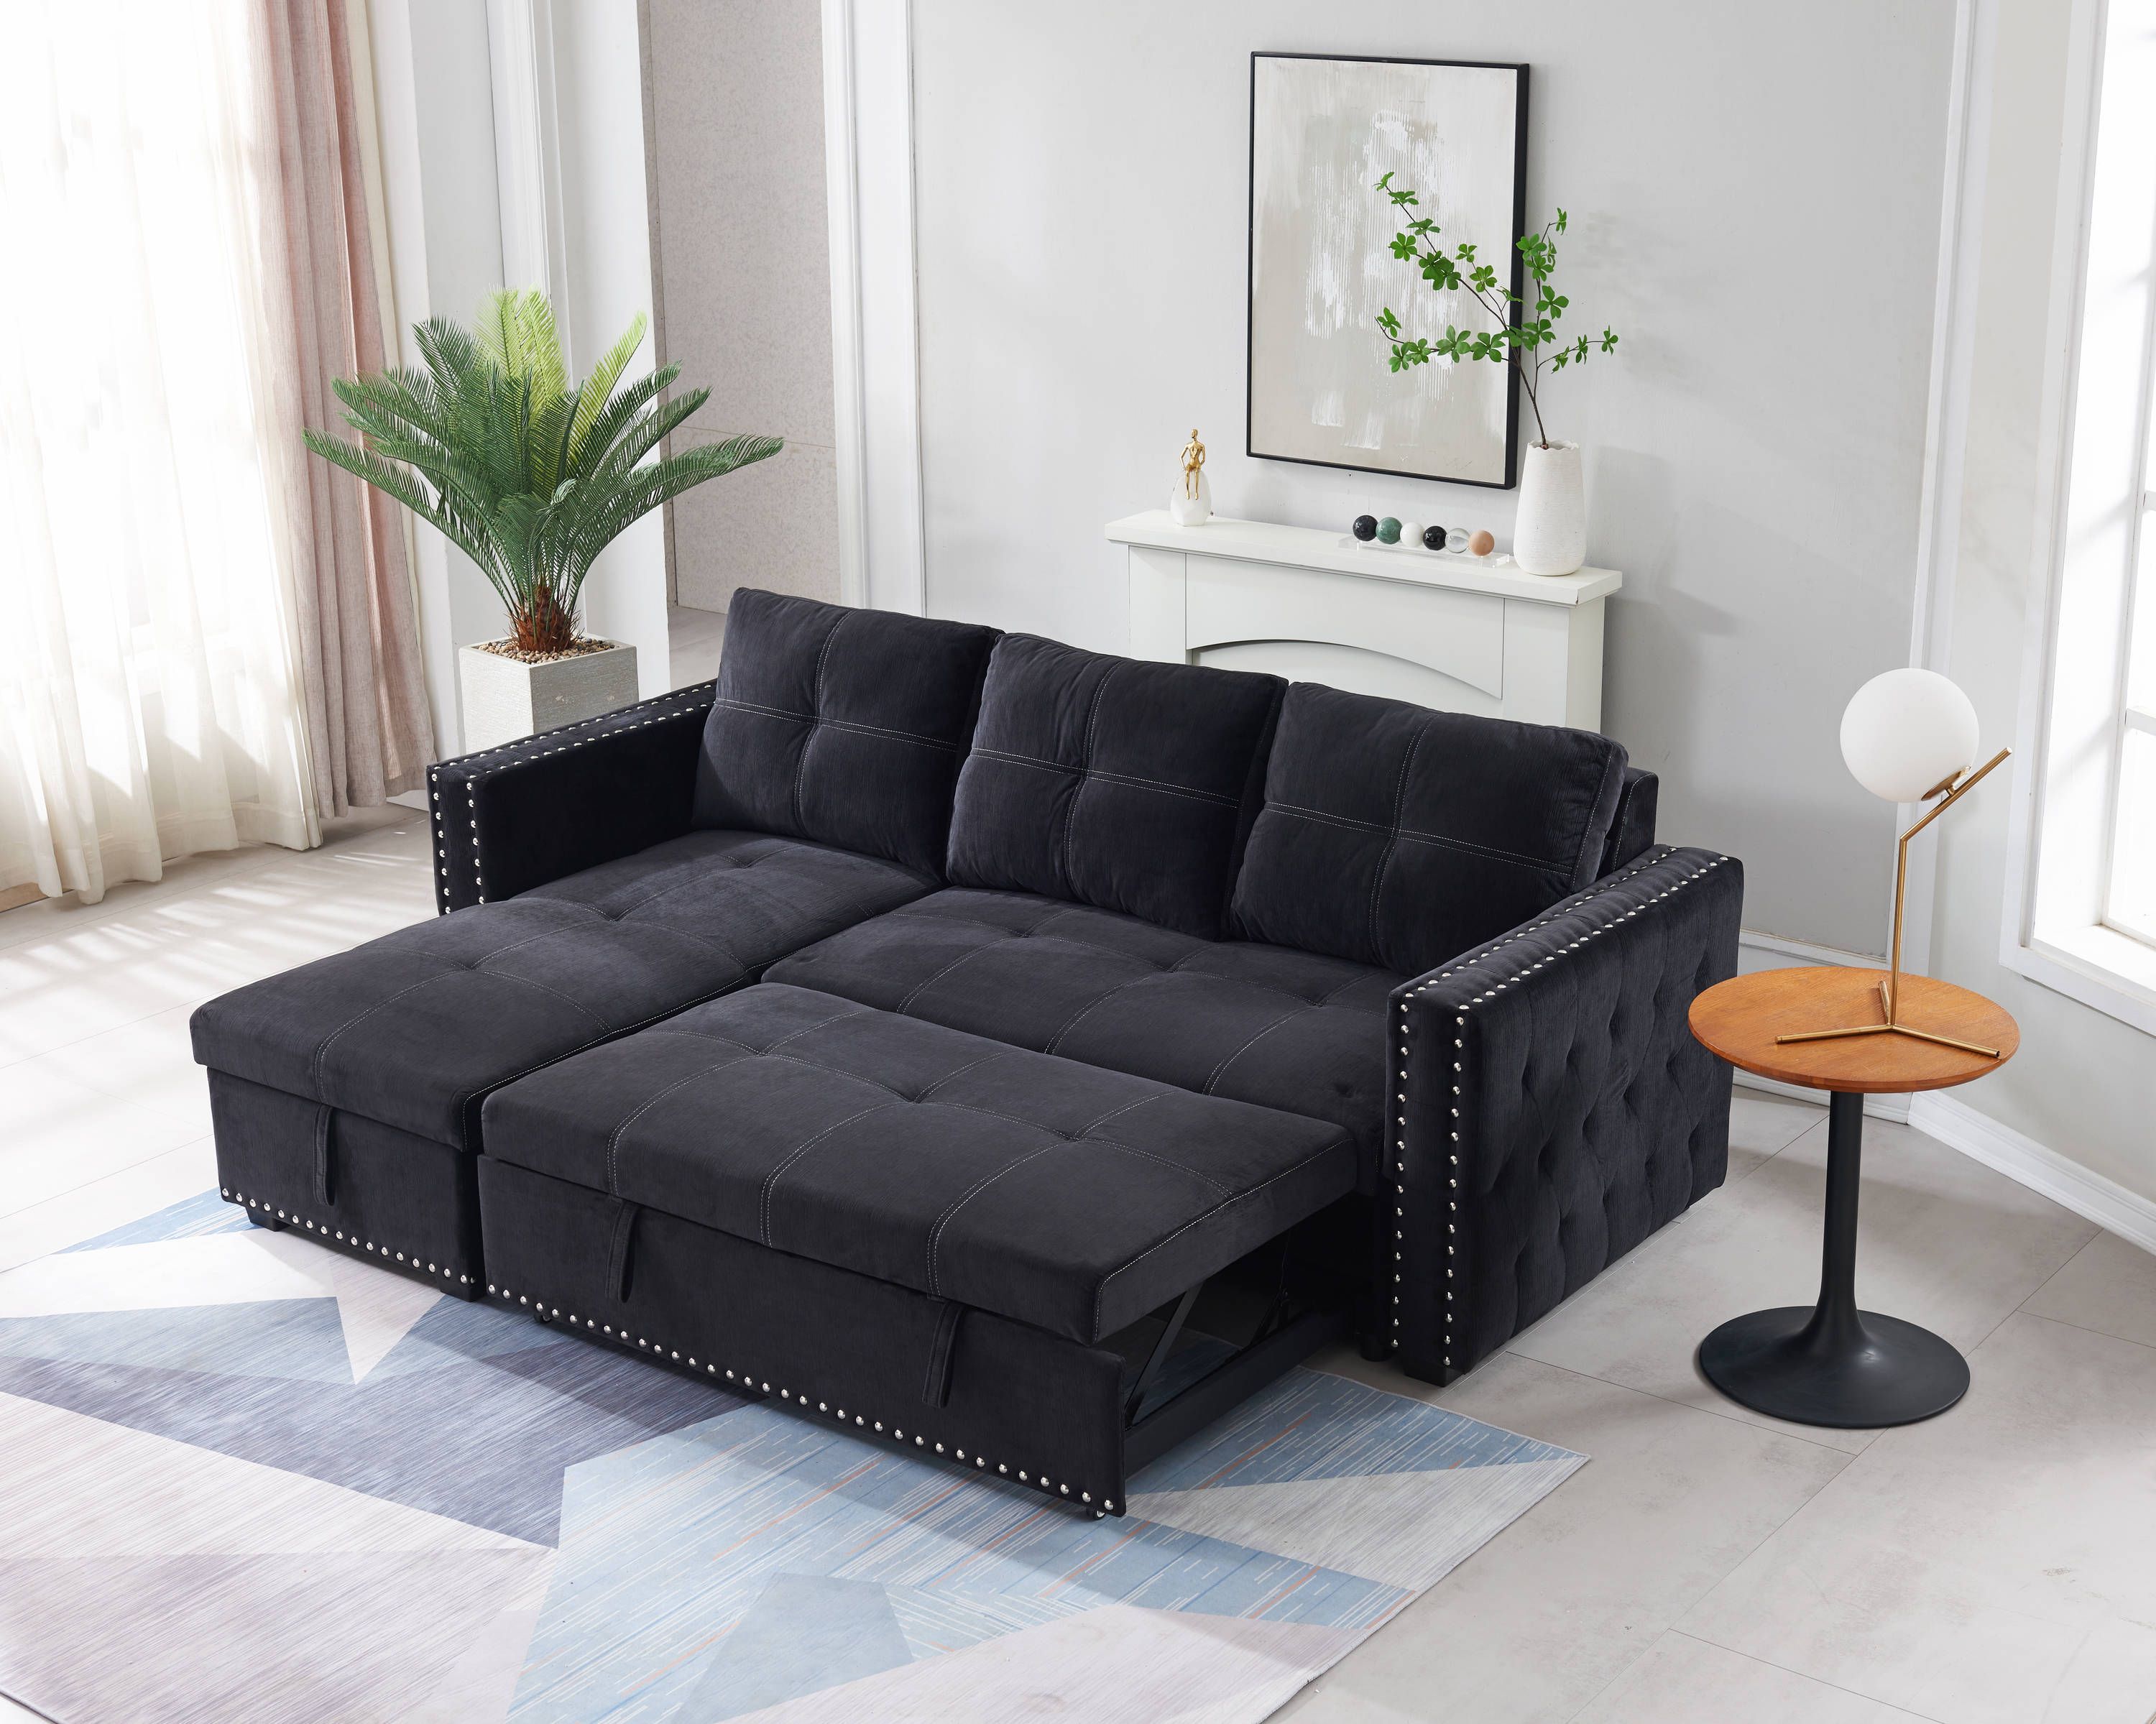 Clihome Sofa With Pulled Out Bed Modern Black Polyester/blend Sleeper In  The Couches, Sofas & Loveseats Department At Lowes Intended For Pull Out Couch Beds (Gallery 4 of 20)